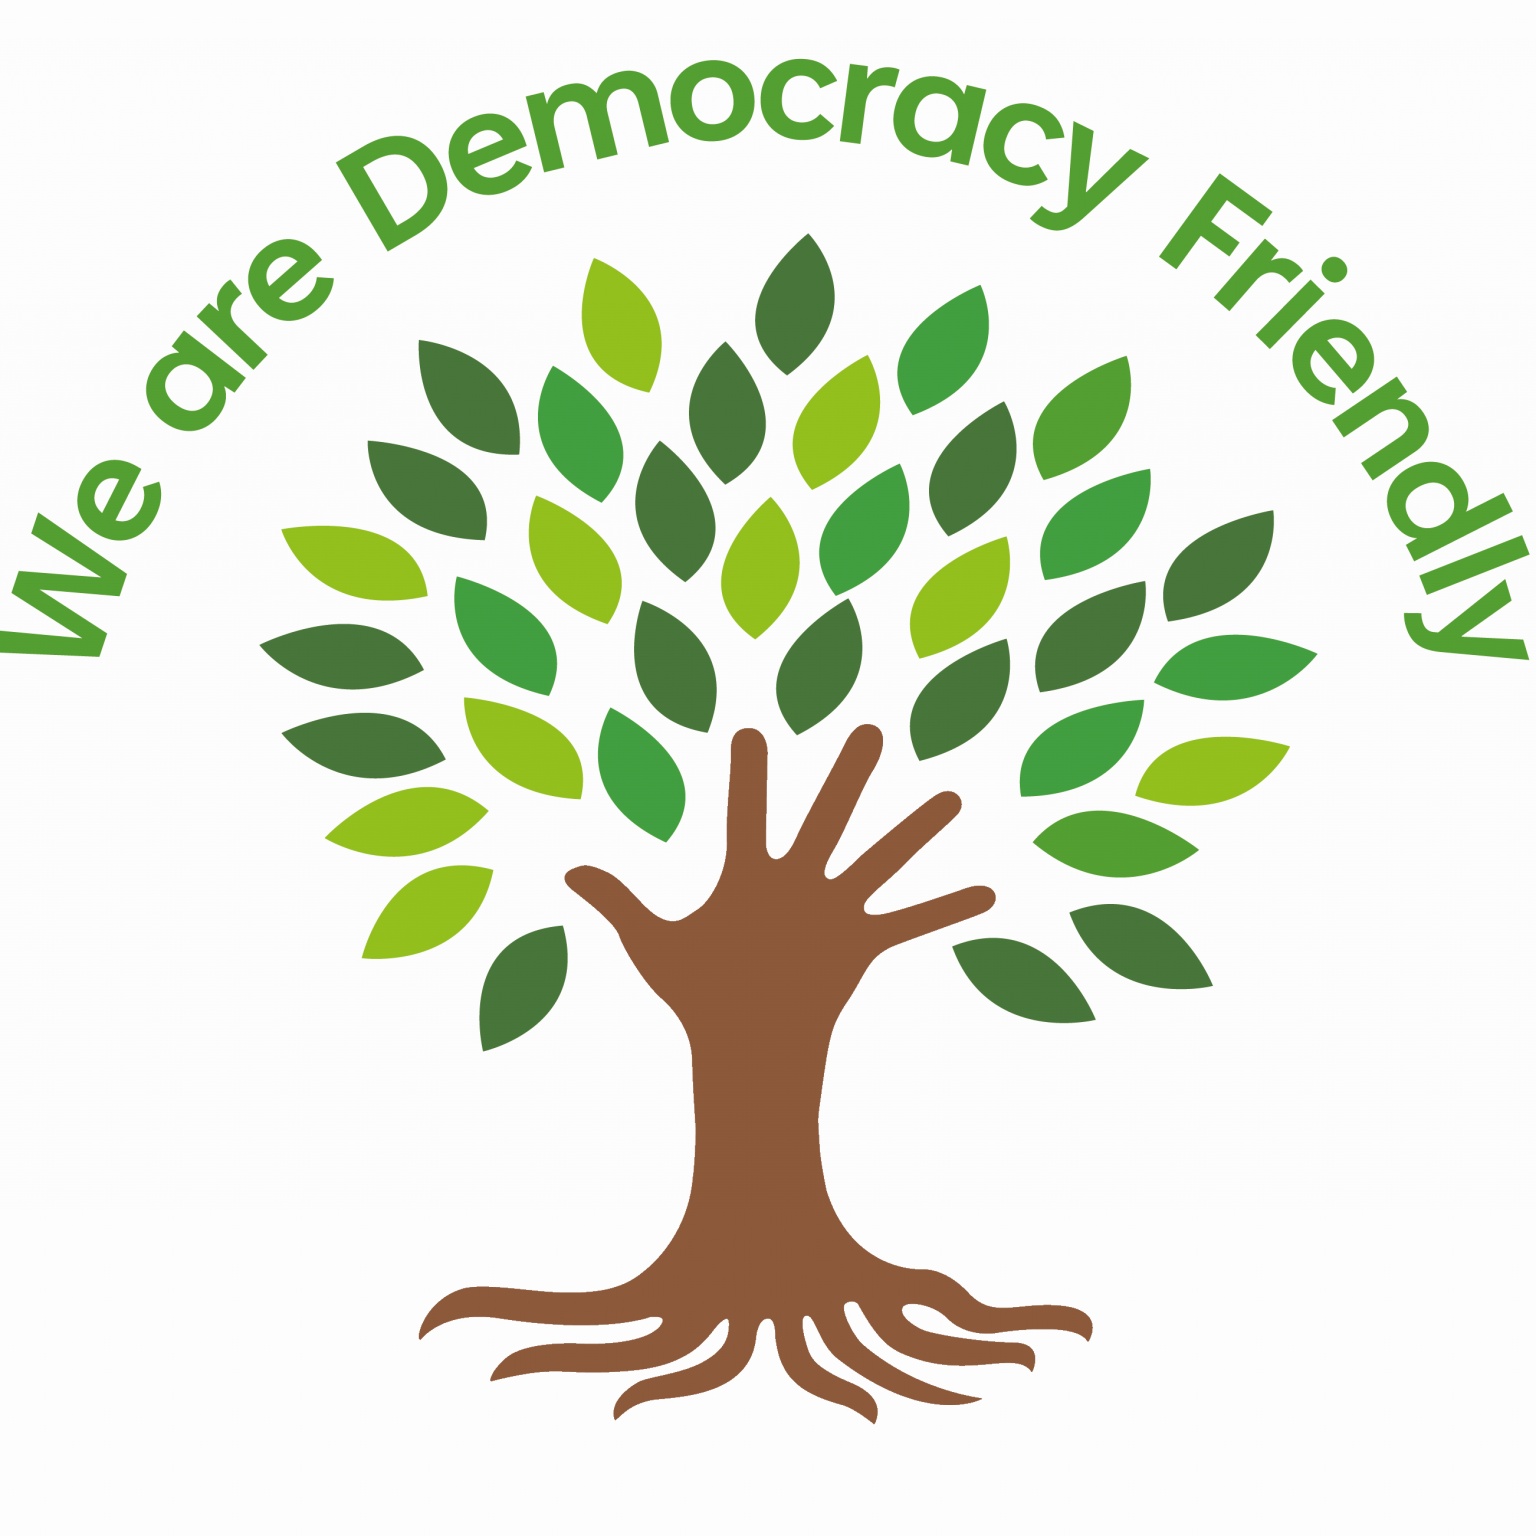 We are Democracy Friendly